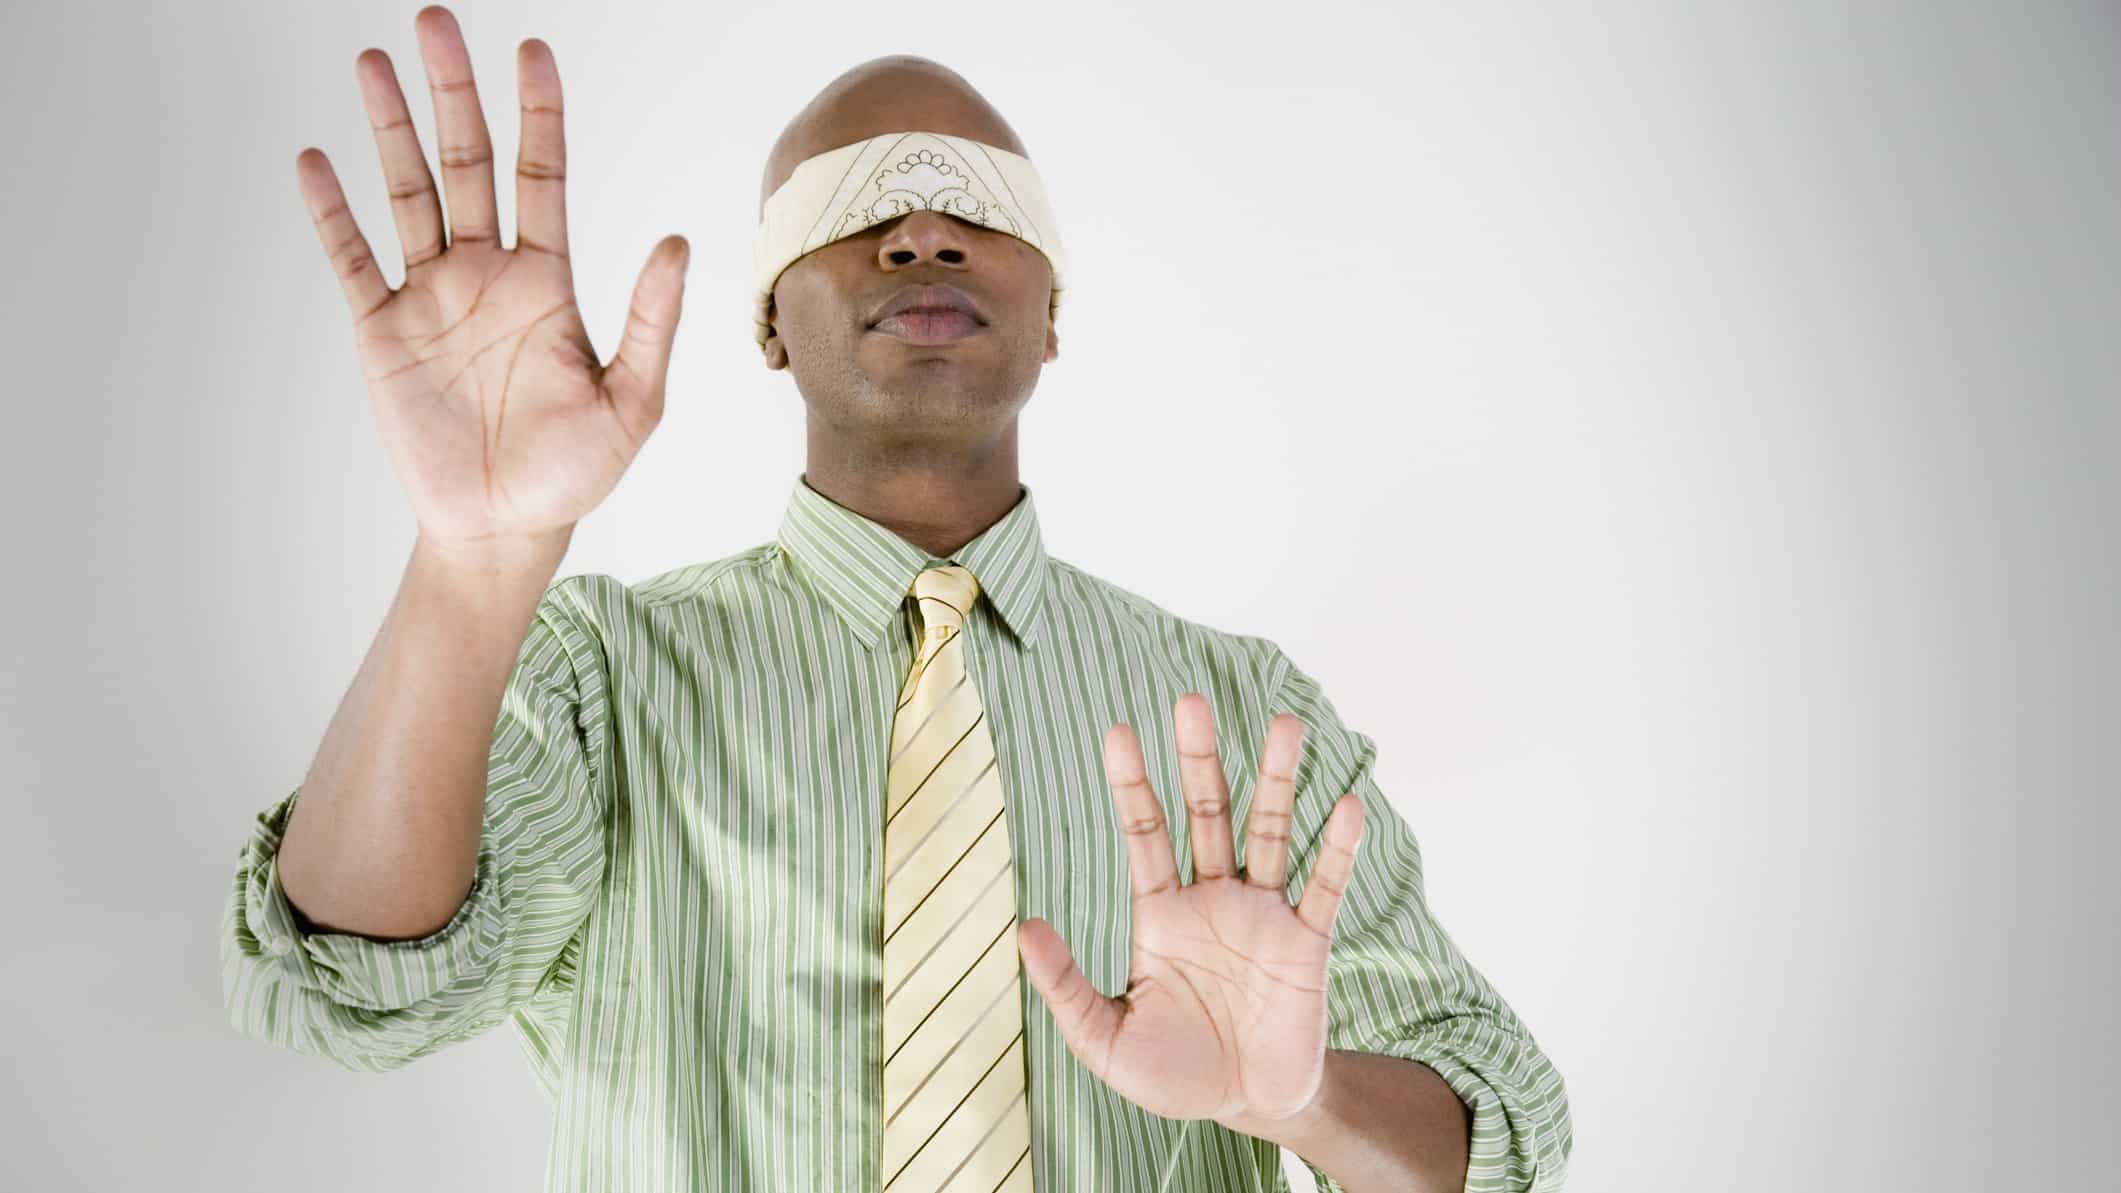 a man wearing a blindfold and business shirt and tie holds his hands up as if to feel his way.